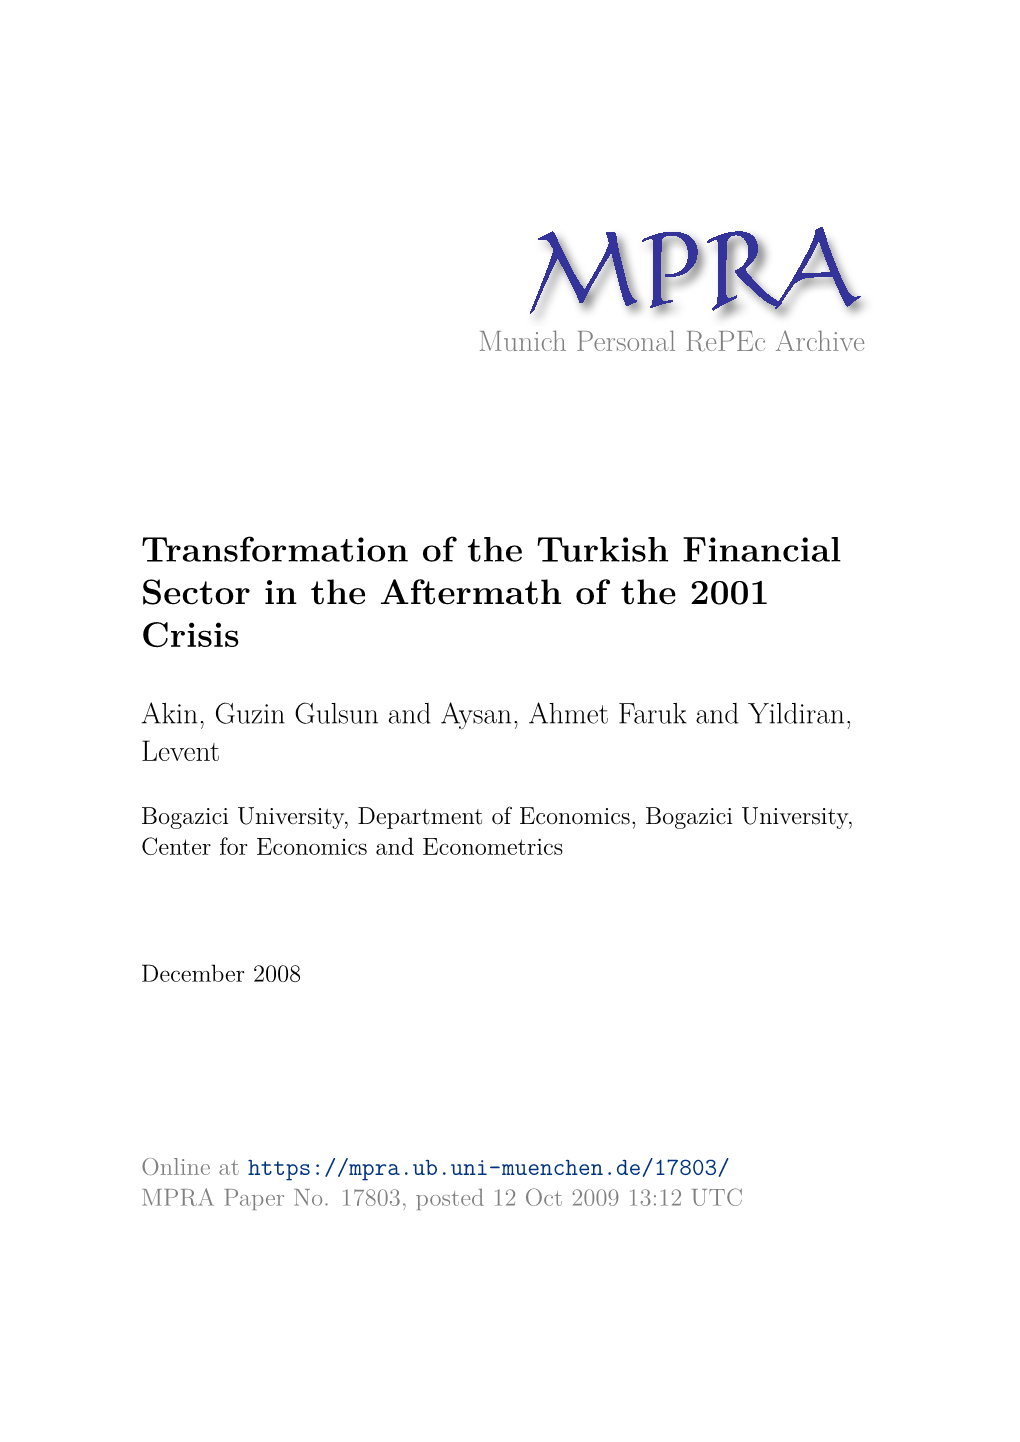 Transformation of the Turkish Financial Sector in the Aftermath of the 2001 Crisis